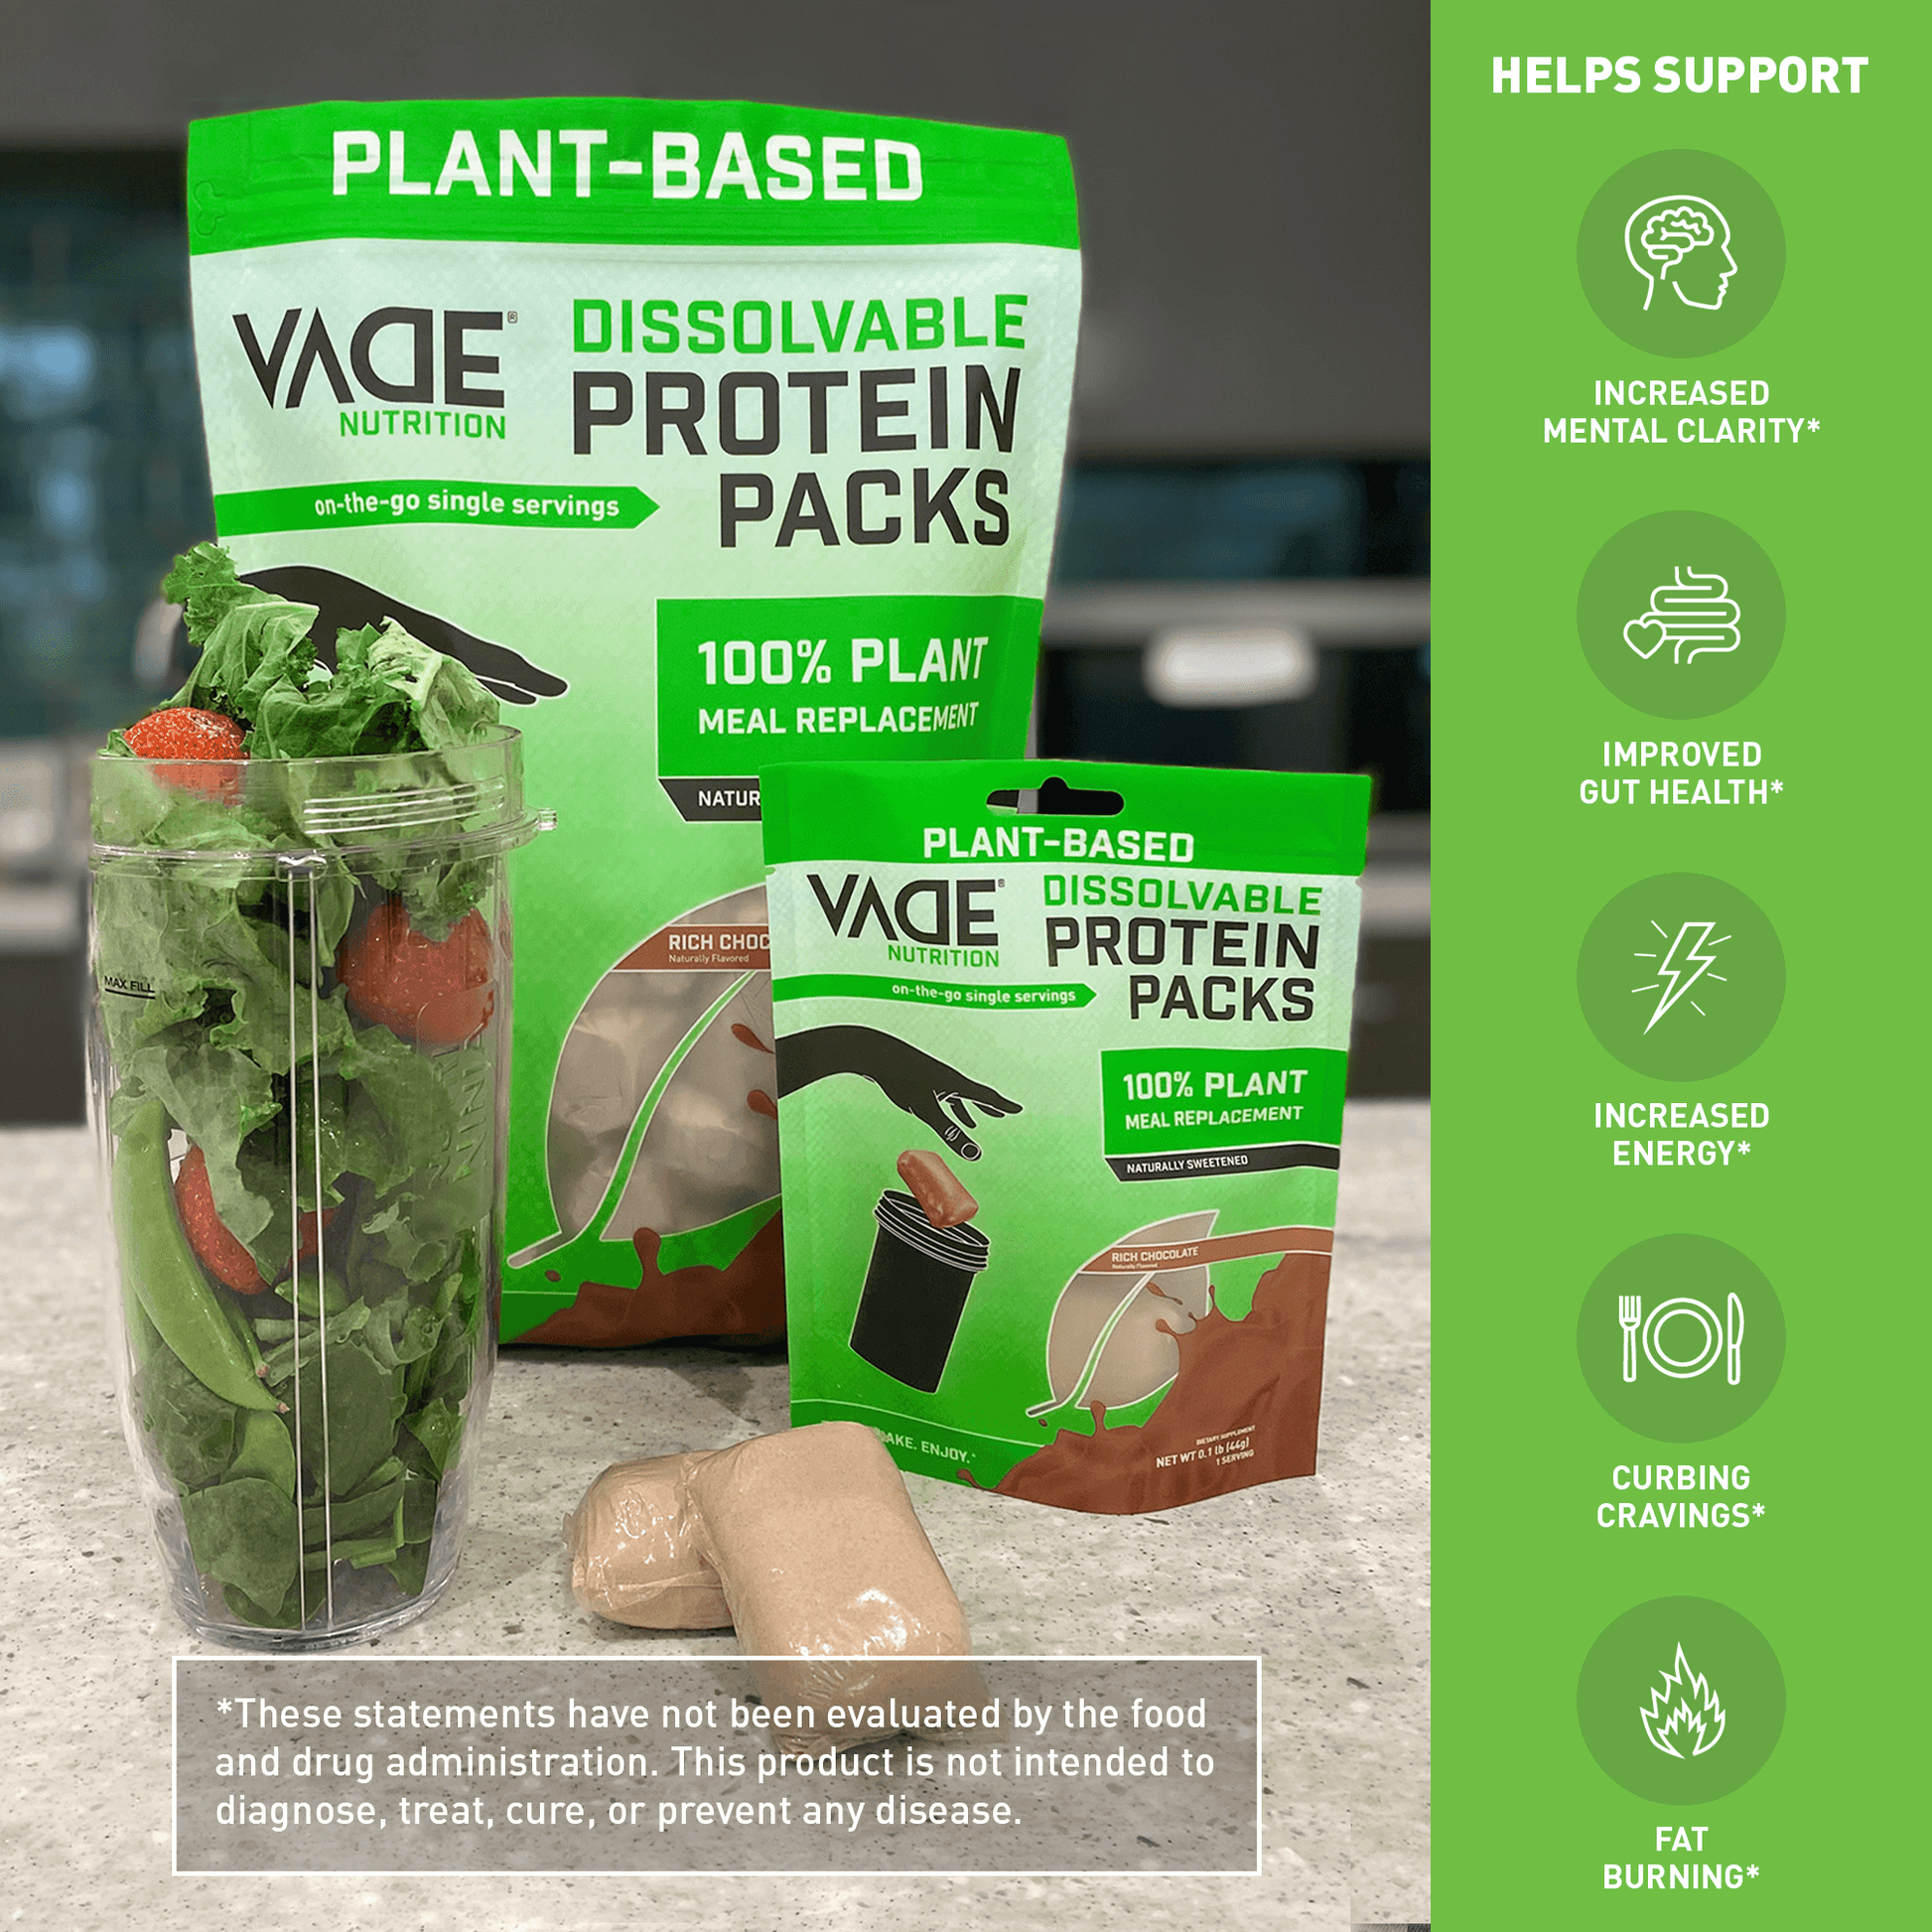 PLANT-BASED MEAL REPLACEMENT RICH CHOCOLATE – VADE Nutrition